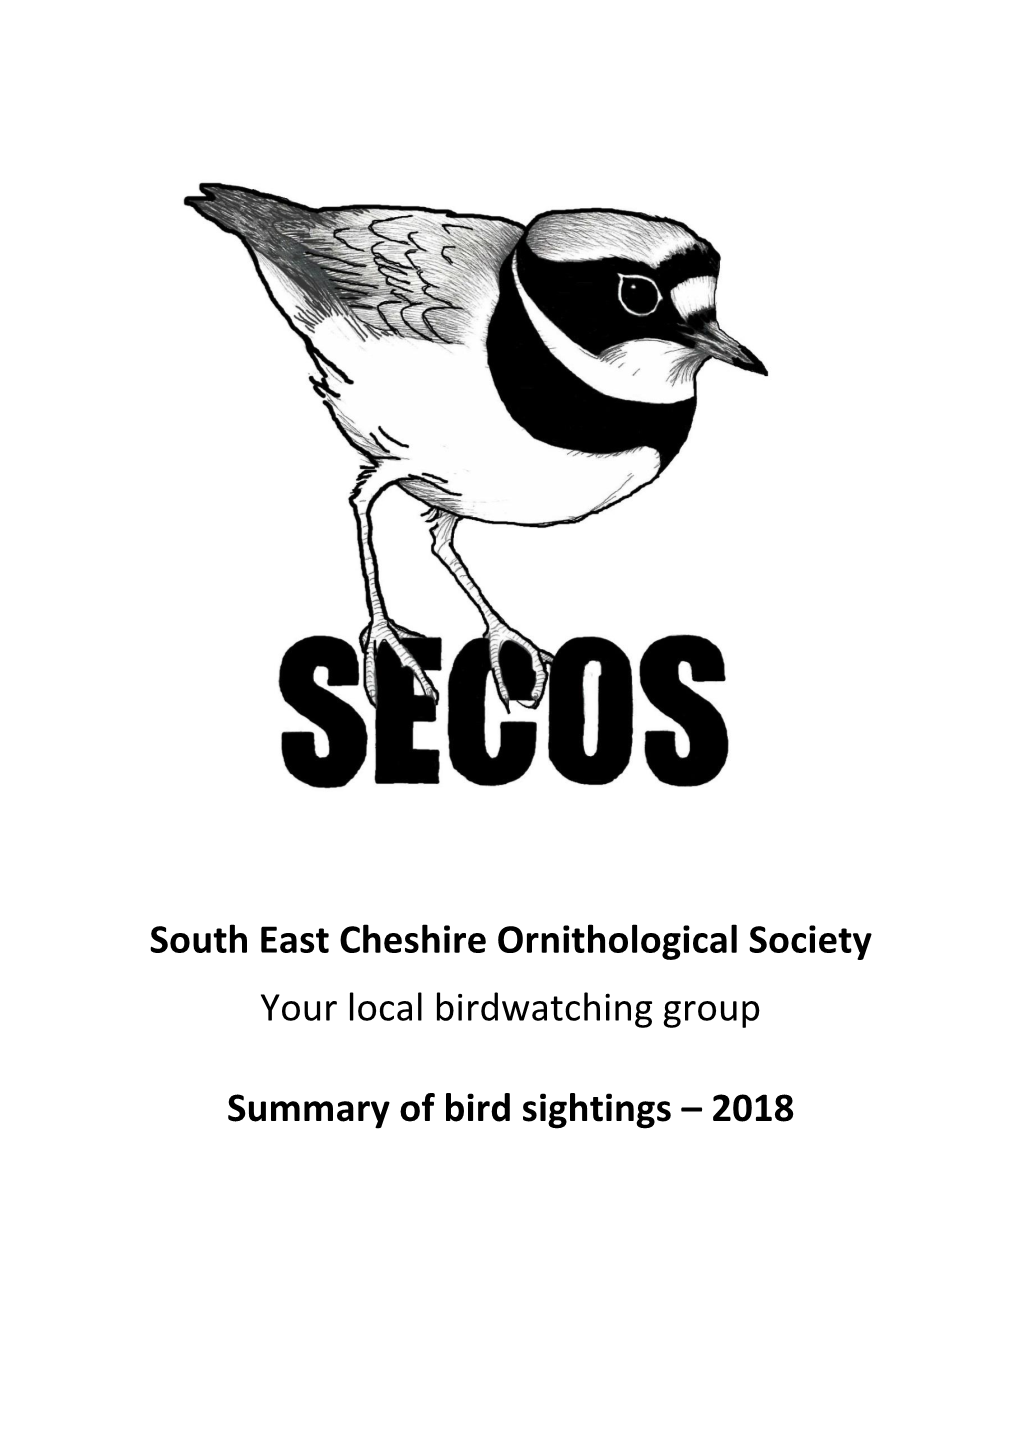 South East Cheshire Ornithological Society Your Local Birdwatching Group